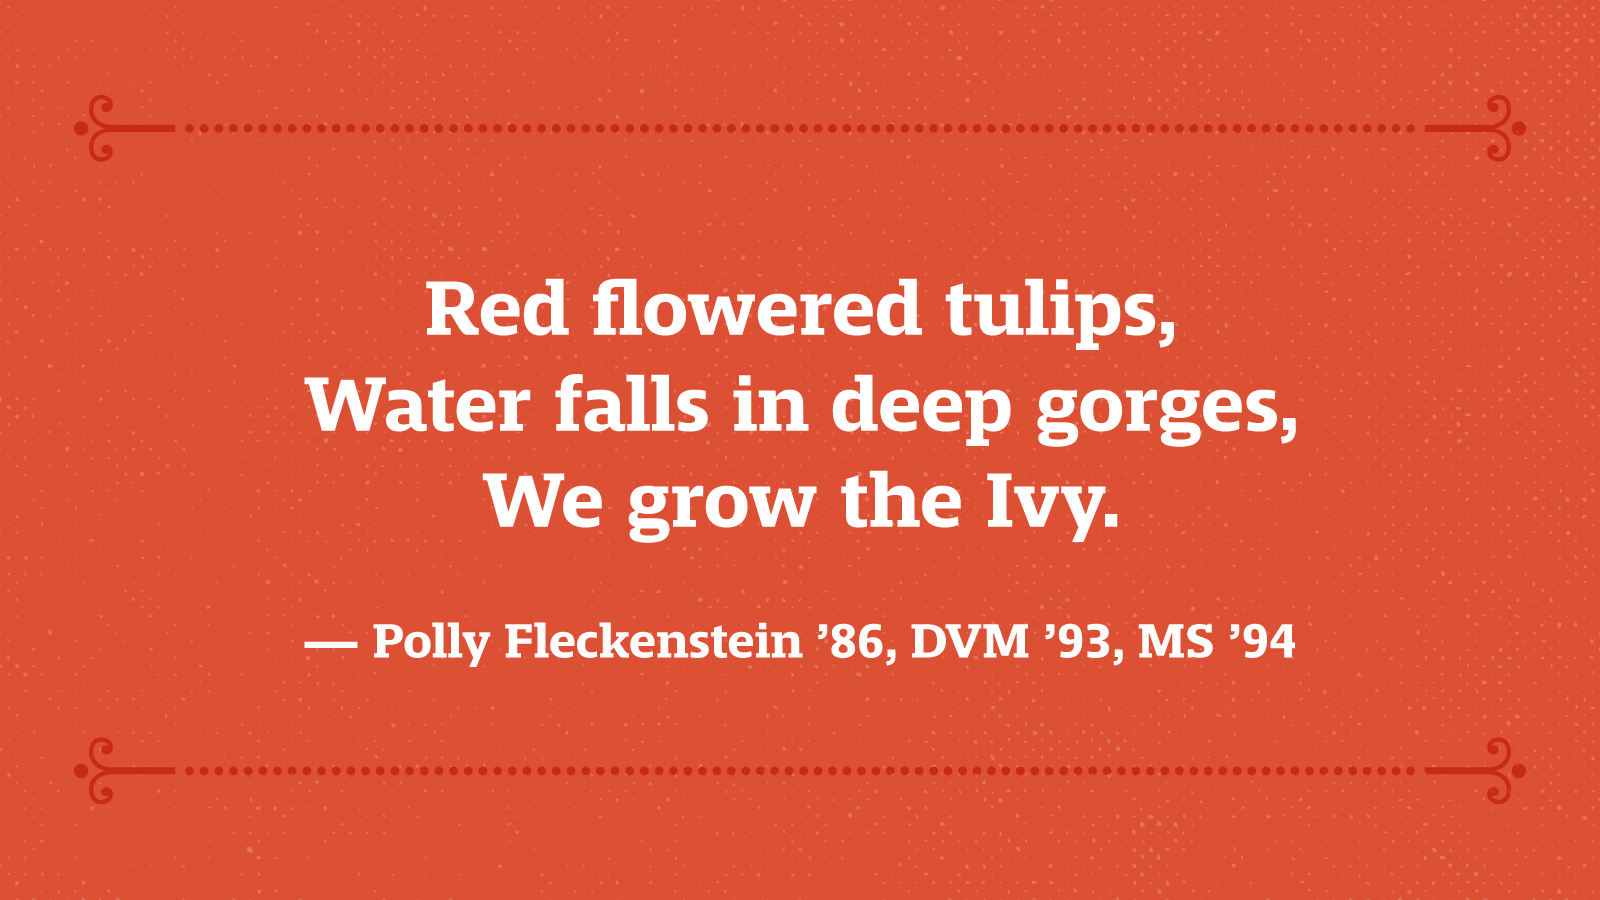 Red flowered tulips, Water falls in deep gorges, We grow the Ivy. — Polly Sisson Fleckenstein ’86, DVM ’93, MS ’94